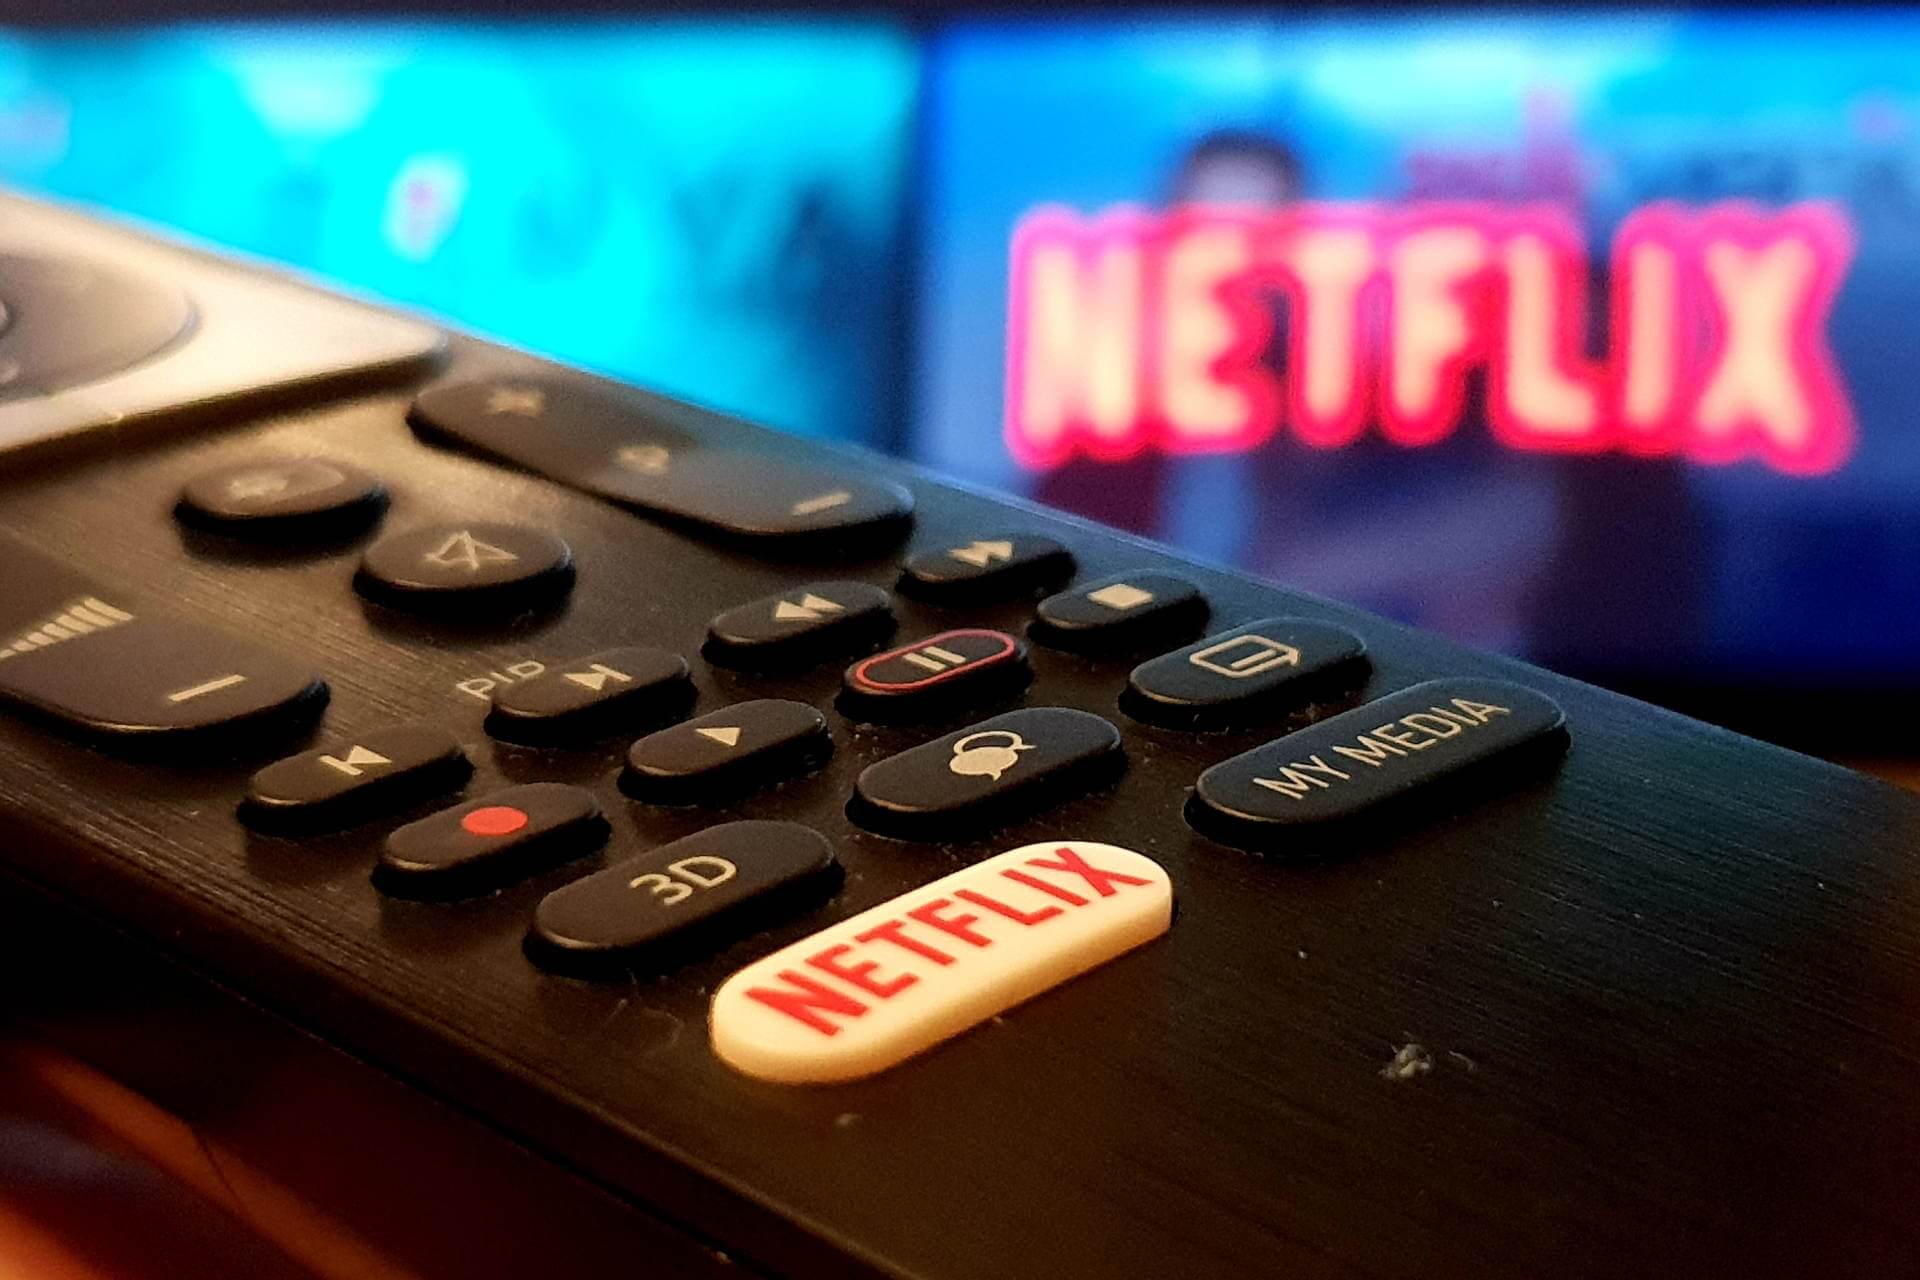 Netflix not loading or showing up on TiVo box 312 fix